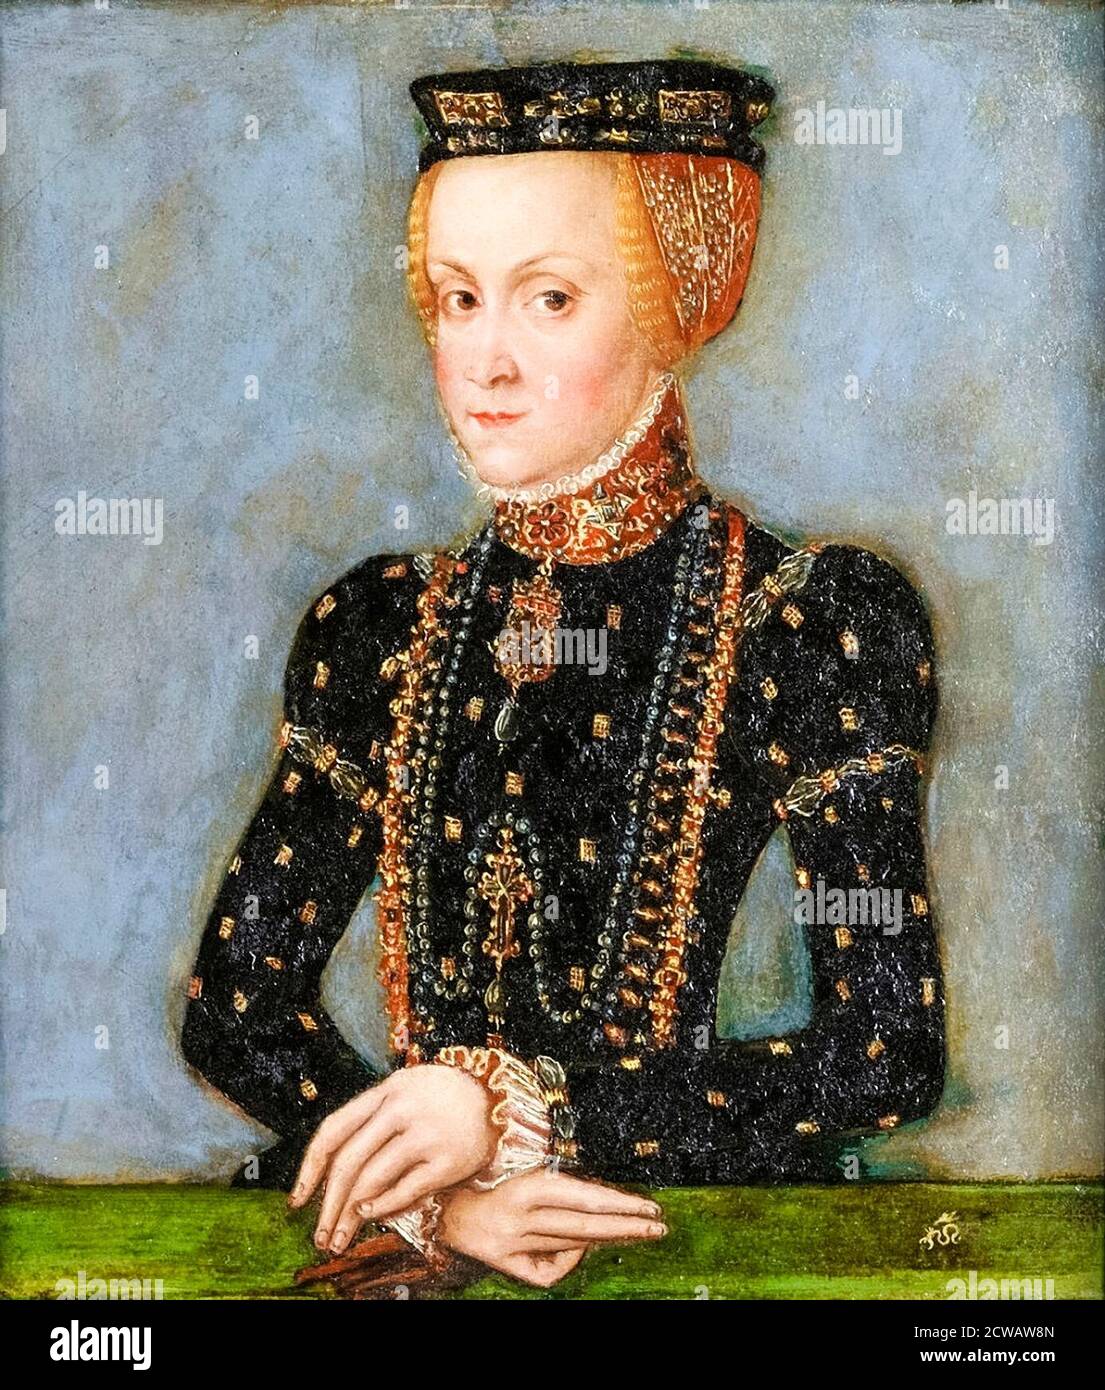 Anna Jagiellon (1523-1596) Queen of Poland, portrait painting by Lucas Cranach the Younger, circa 1553 Stock Photo